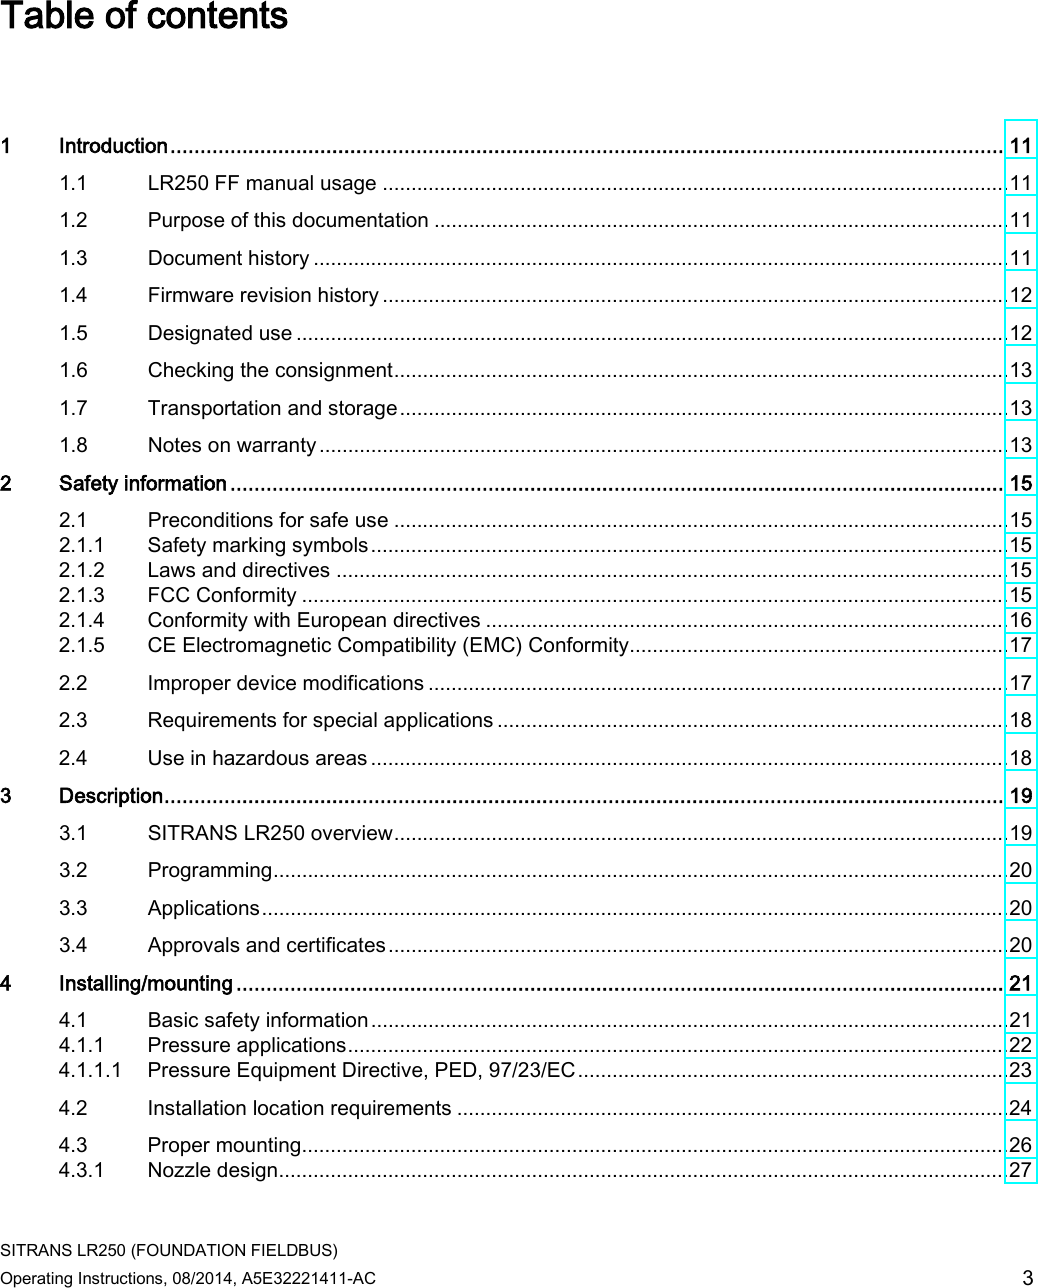  SITRANS LR250 (FOUNDATION FIELDBUS) Operating Instructions, 08/2014, A5E32221411-AC 3 Table of contents   1  Introduction ........................................................................................................................................... 11 1.1 LR250 FF manual usage ............................................................................................................. 11 1.2 Purpose of this documentation .................................................................................................... 11 1.3 Document history ......................................................................................................................... 11 1.4 Firmware revision history ............................................................................................................. 12 1.5 Designated use ............................................................................................................................ 12 1.6 Checking the consignment ........................................................................................................... 13 1.7 Transportation and storage .......................................................................................................... 13 1.8 Notes on warranty ........................................................................................................................ 13 2  Safety information ................................................................................................................................. 15 2.1 Preconditions for safe use ........................................................................................................... 15 2.1.1 Safety marking symbols ............................................................................................................... 15 2.1.2 Laws and directives ..................................................................................................................... 15 2.1.3 FCC Conformity ........................................................................................................................... 15 2.1.4 Conformity with European directives ........................................................................................... 16 2.1.5 CE Electromagnetic Compatibility (EMC) Conformity.................................................................. 17 2.2 Improper device modifications ..................................................................................................... 17 2.3 Requirements for special applications ......................................................................................... 18 2.4 Use in hazardous areas ............................................................................................................... 18 3  Description ............................................................................................................................................ 19 3.1 SITRANS LR250 overview ........................................................................................................... 19 3.2 Programming ................................................................................................................................ 20 3.3 Applications .................................................................................................................................. 20 3.4 Approvals and certificates ............................................................................................................ 20 4  Installing/mounting ................................................................................................................................ 21 4.1 Basic safety information ............................................................................................................... 21 4.1.1 Pressure applications ................................................................................................................... 22 4.1.1.1 Pressure Equipment Directive, PED, 97/23/EC ........................................................................... 23 4.2 Installation location requirements ................................................................................................ 24 4.3 Proper mounting........................................................................................................................... 26 4.3.1 Nozzle design ............................................................................................................................... 27 